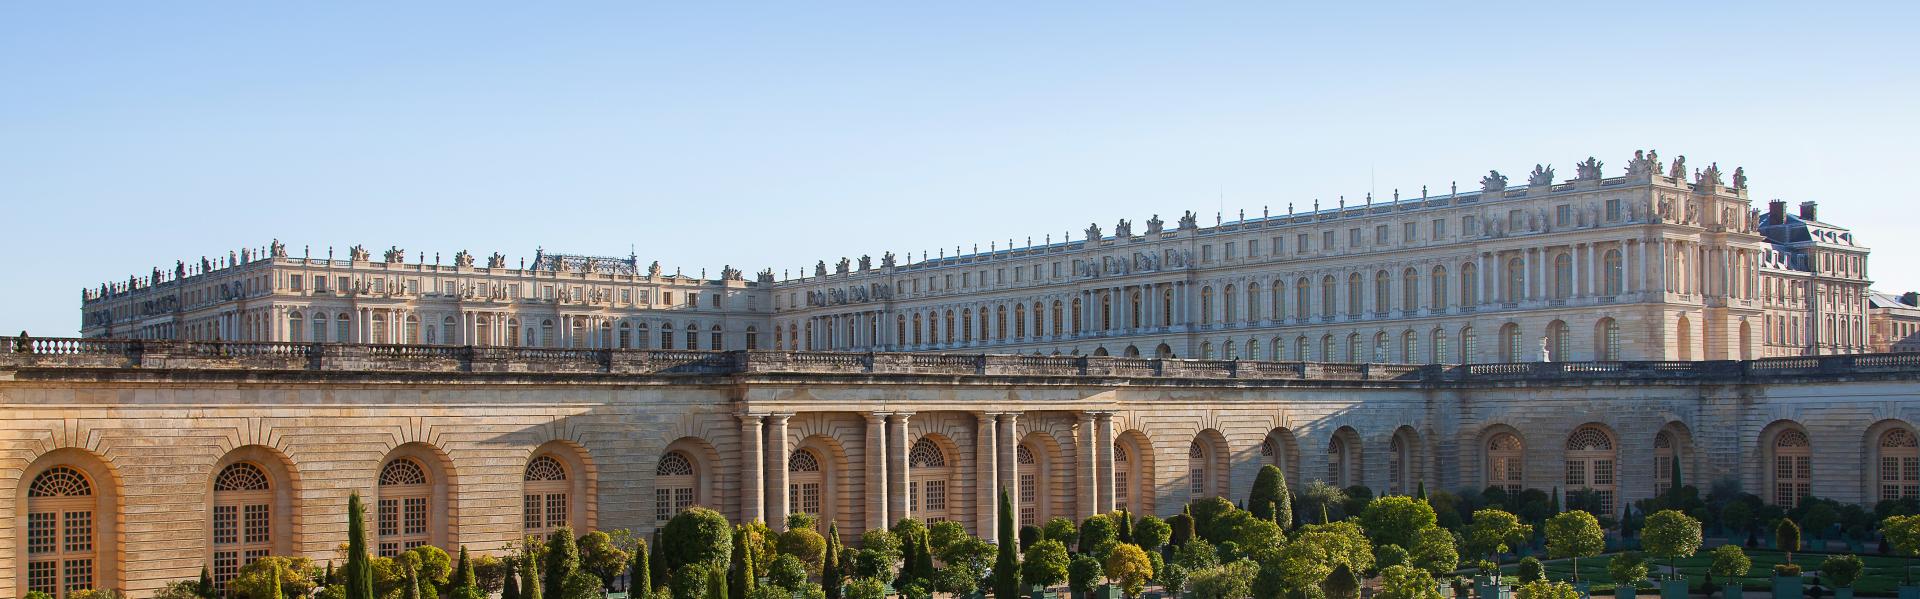 The Palace of Versailles In France